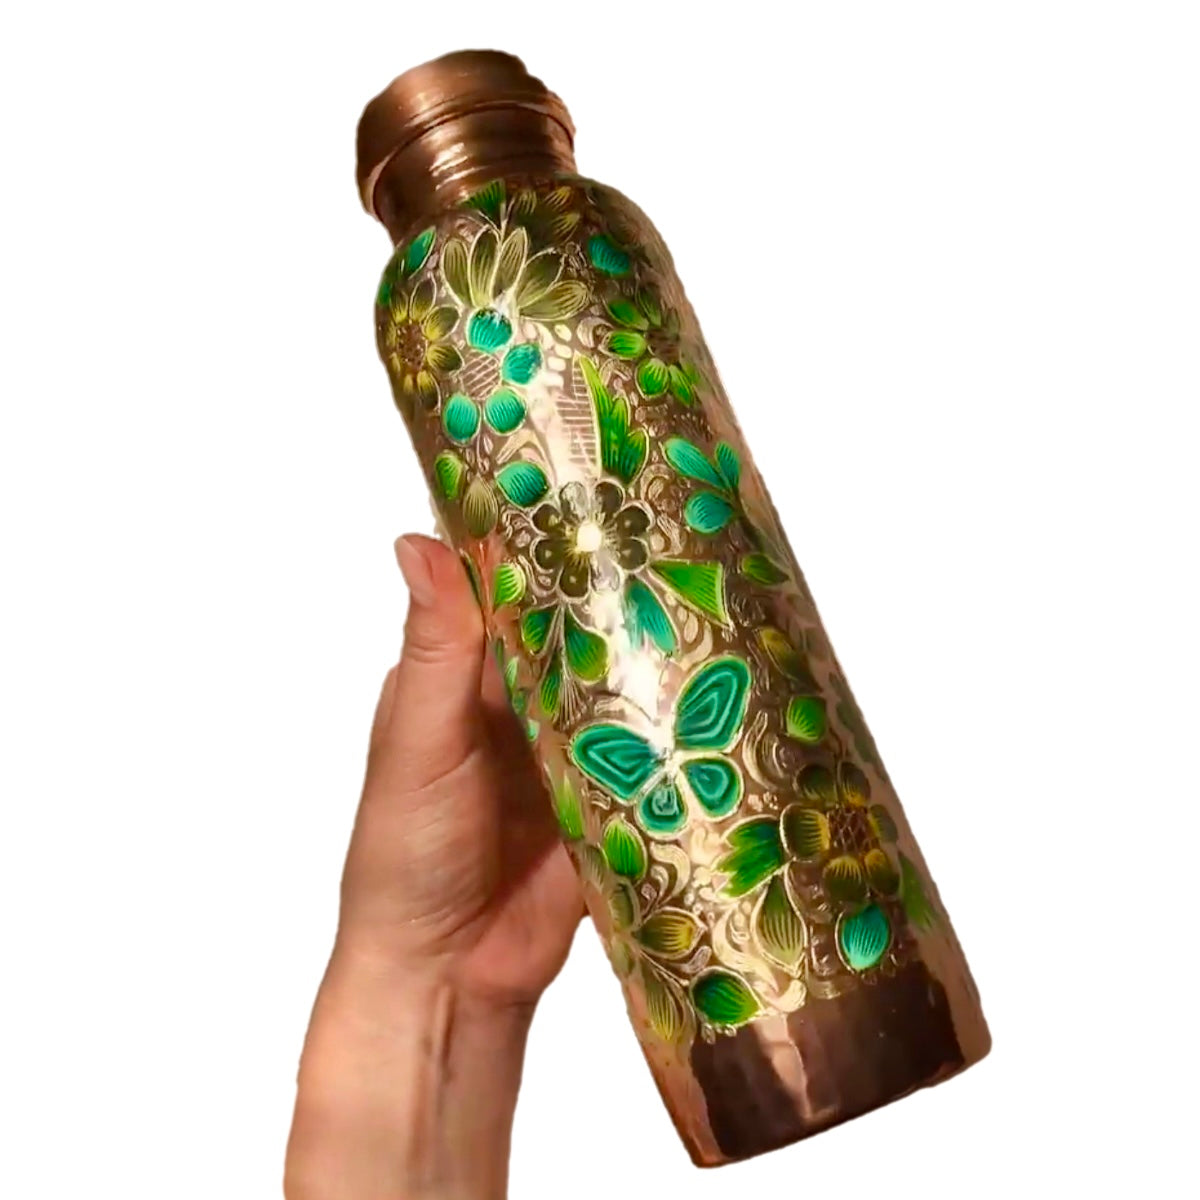 Mexican Copper 1 L / 33 oz. Water Bottle- Hand Painted Green FLores CoLores Decor